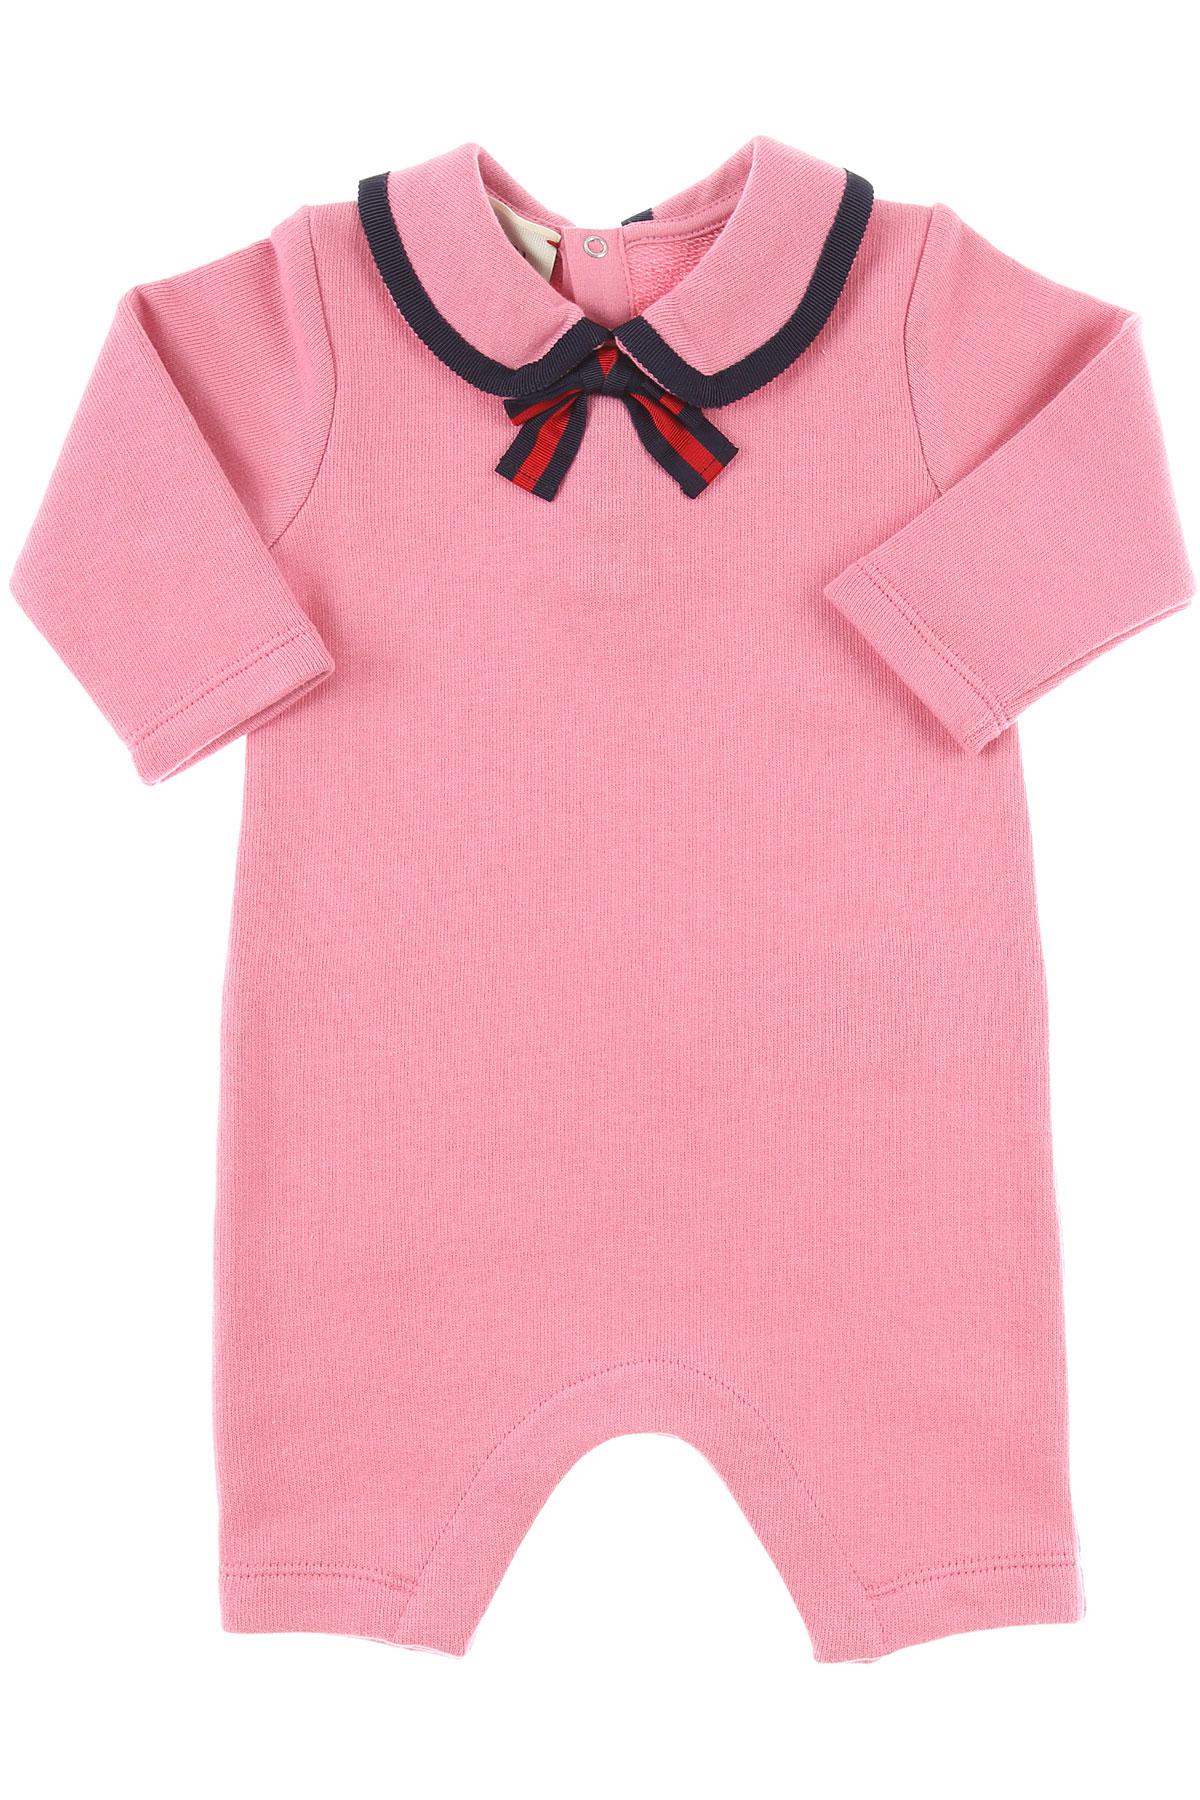 Gucci Baby Girl Clothes Sale Online, 51% OFF | www.logistica360.pe